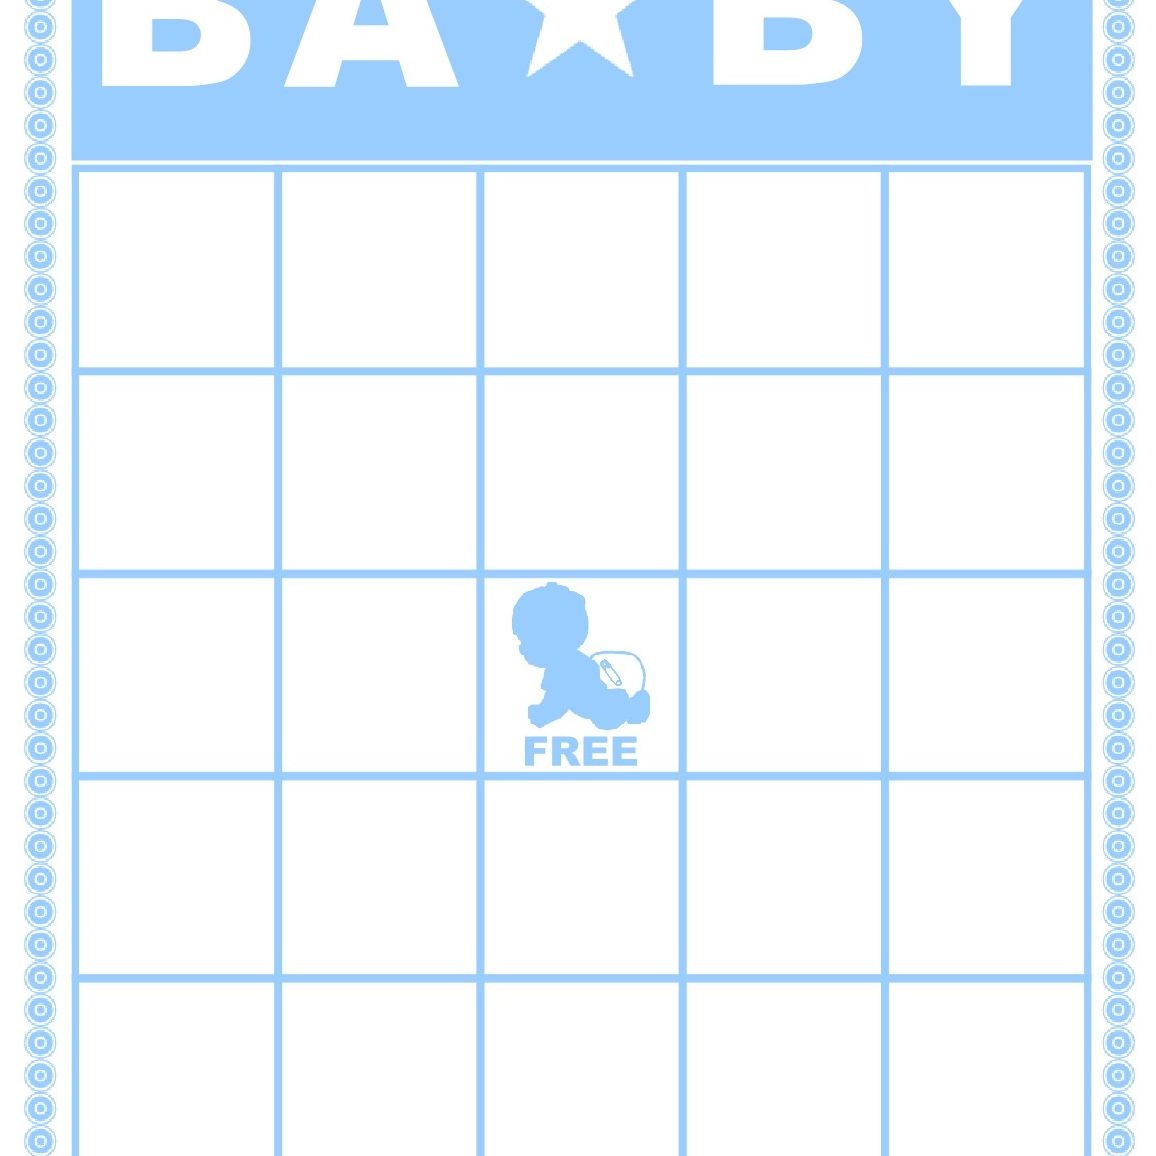 Free Baby Shower Bingo Cards Your Guests Will Love - Free Printable Baby Shower Bingo